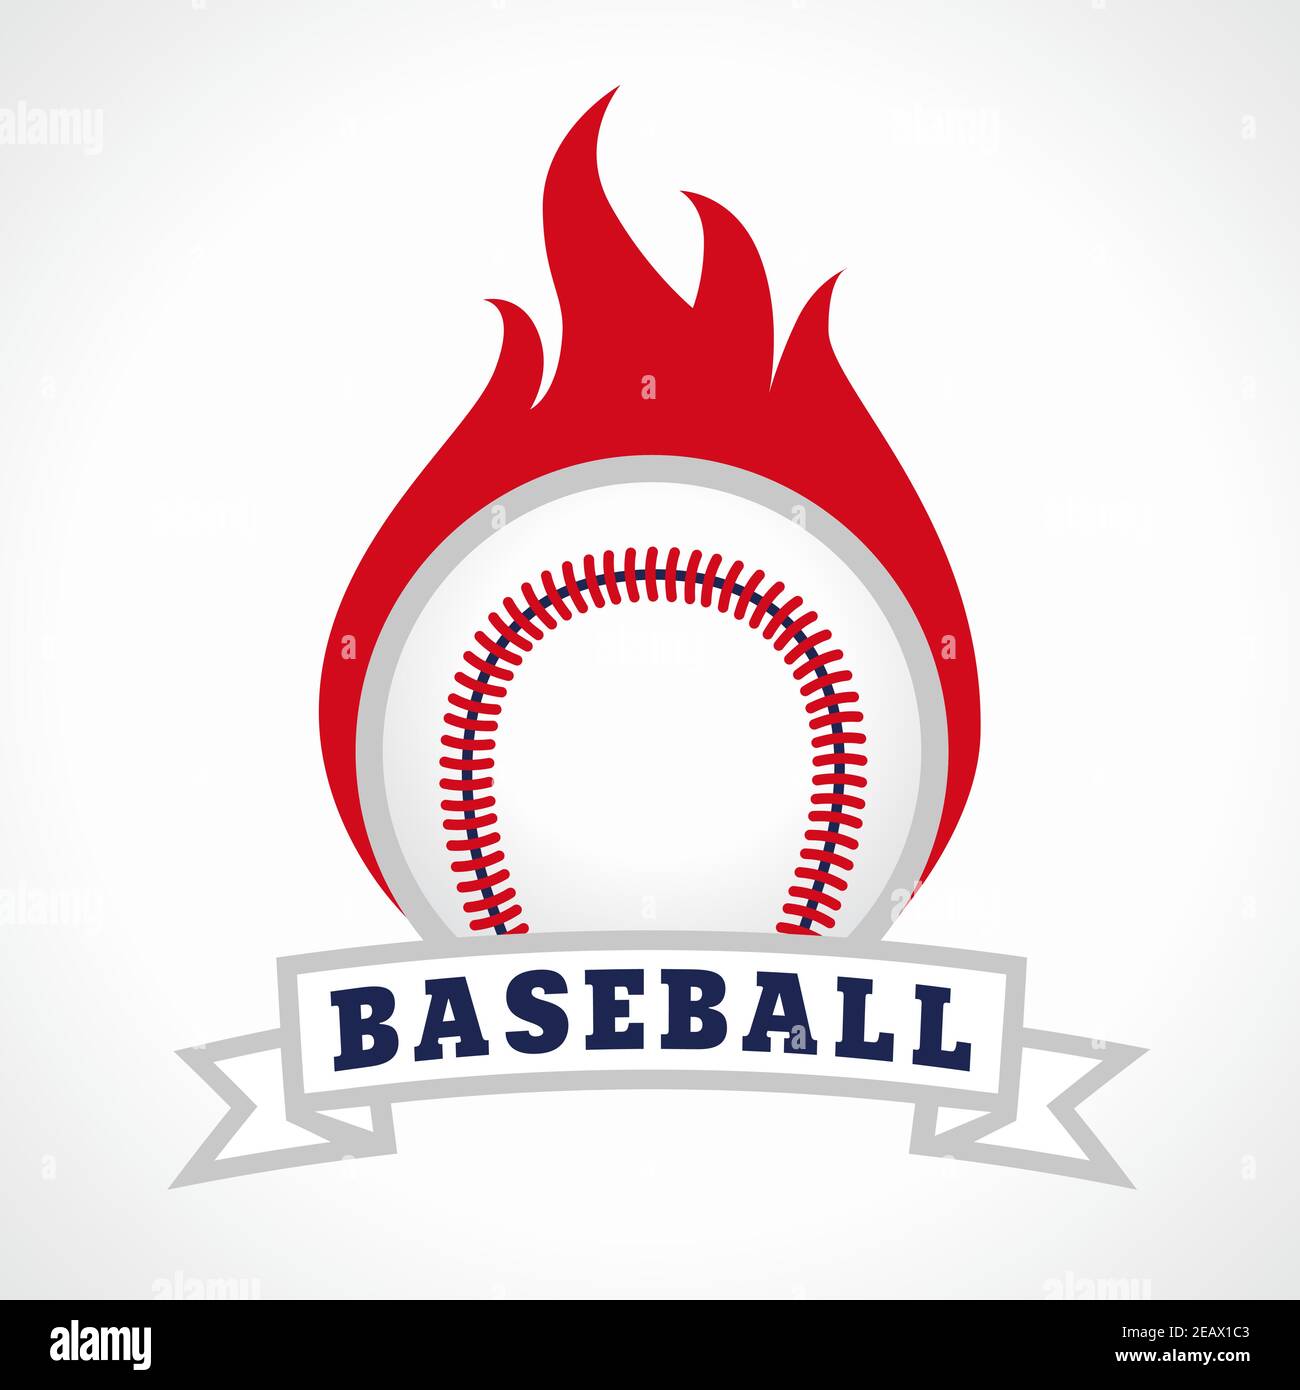 Burning and flaming baseball ball. Fiery sign, vector logo of teams, national competitions, union, matches, leagues or sport equipment shop. Children Stock Vector